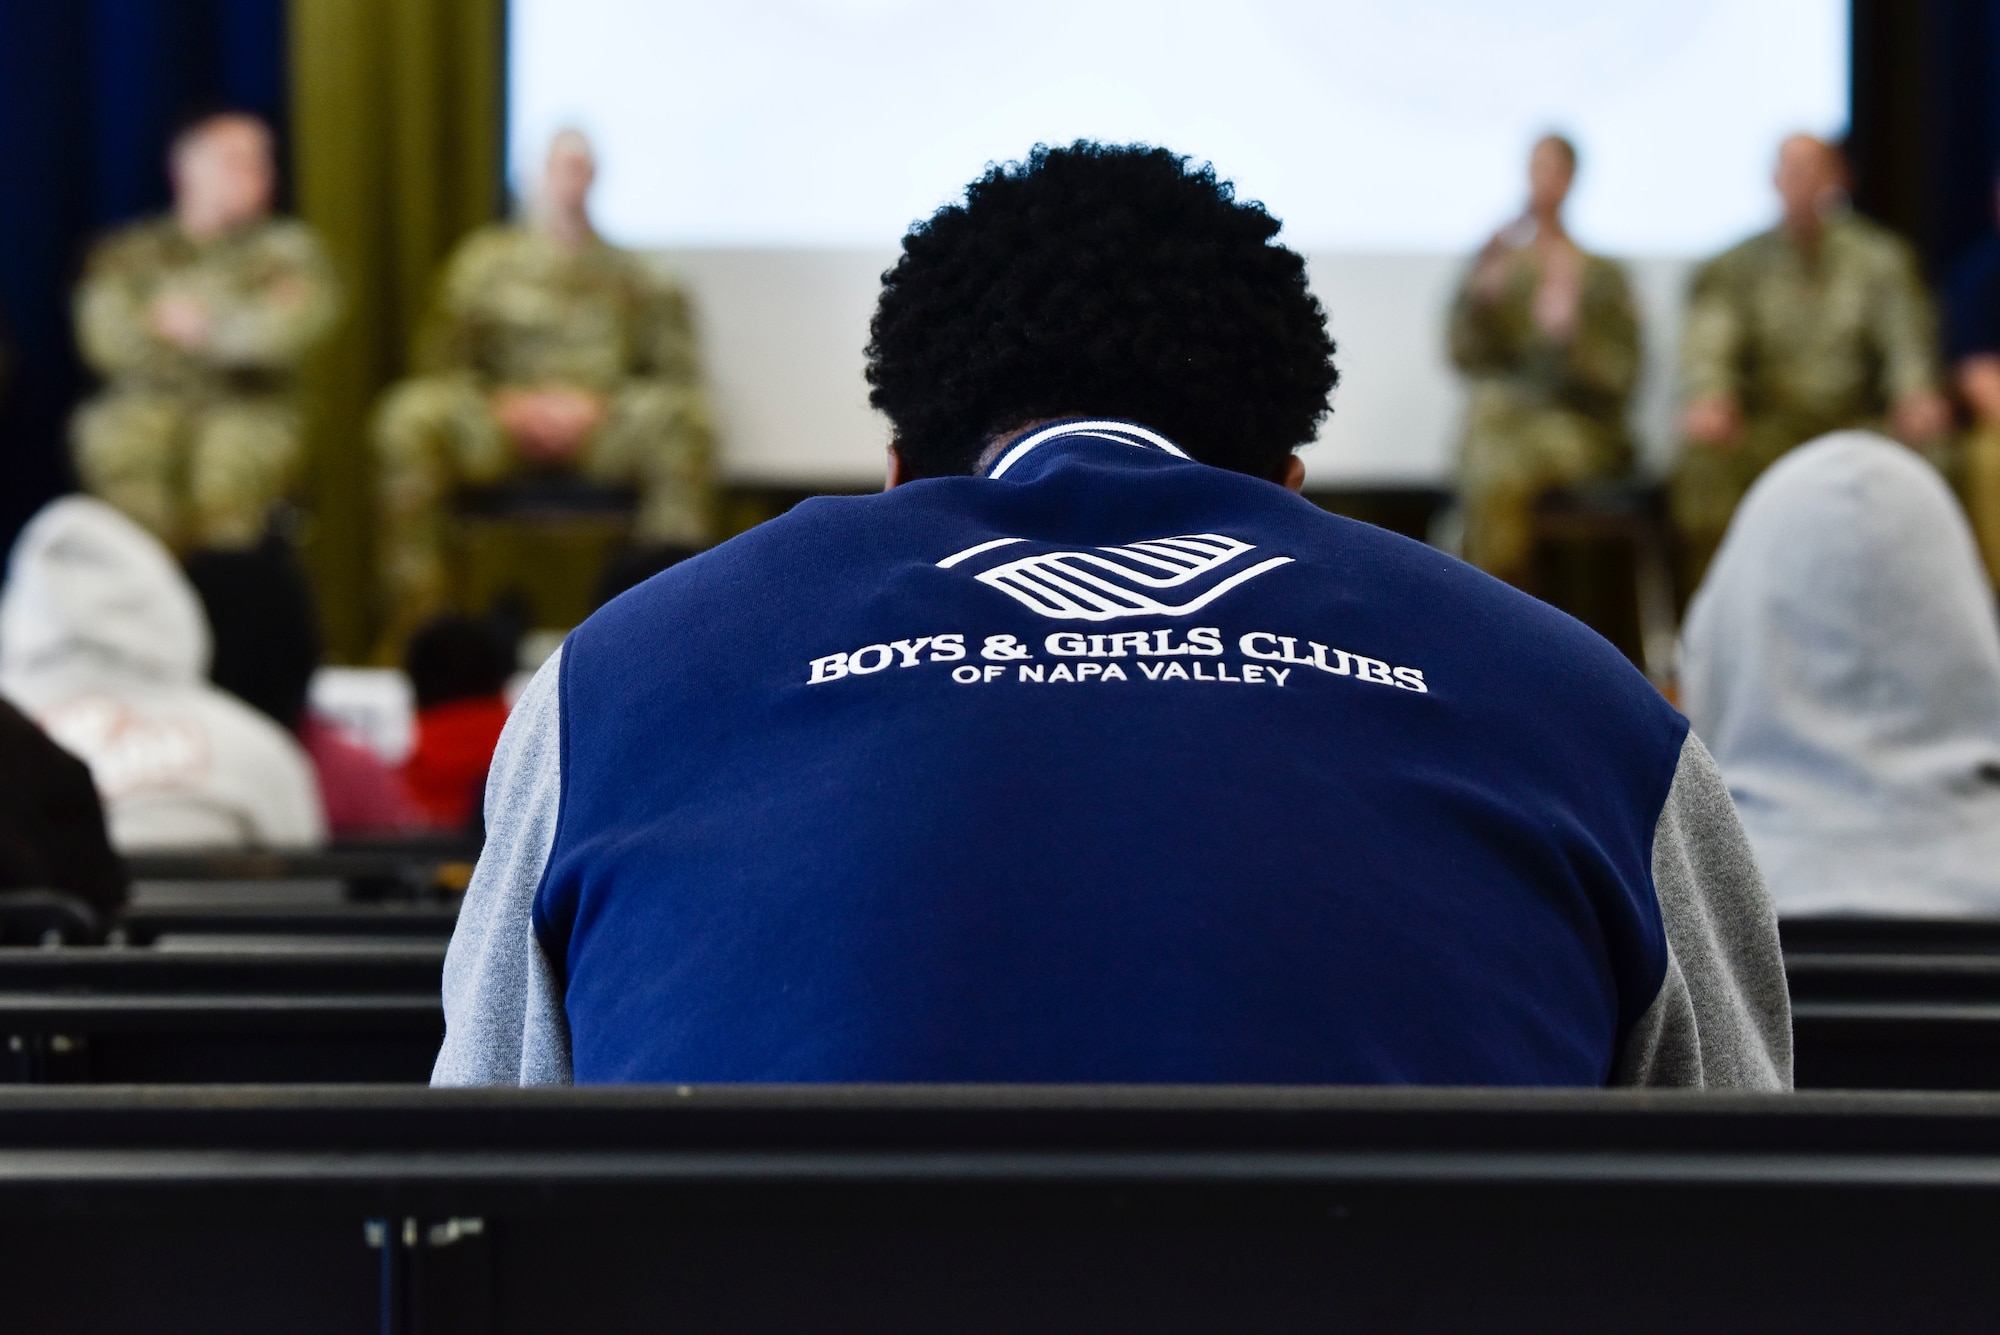 Airmen and Guardians from Beale Air Force Base and Travis Air Force Base share their experiences within the military in Napa Valley, California, Jan. 25, 2023